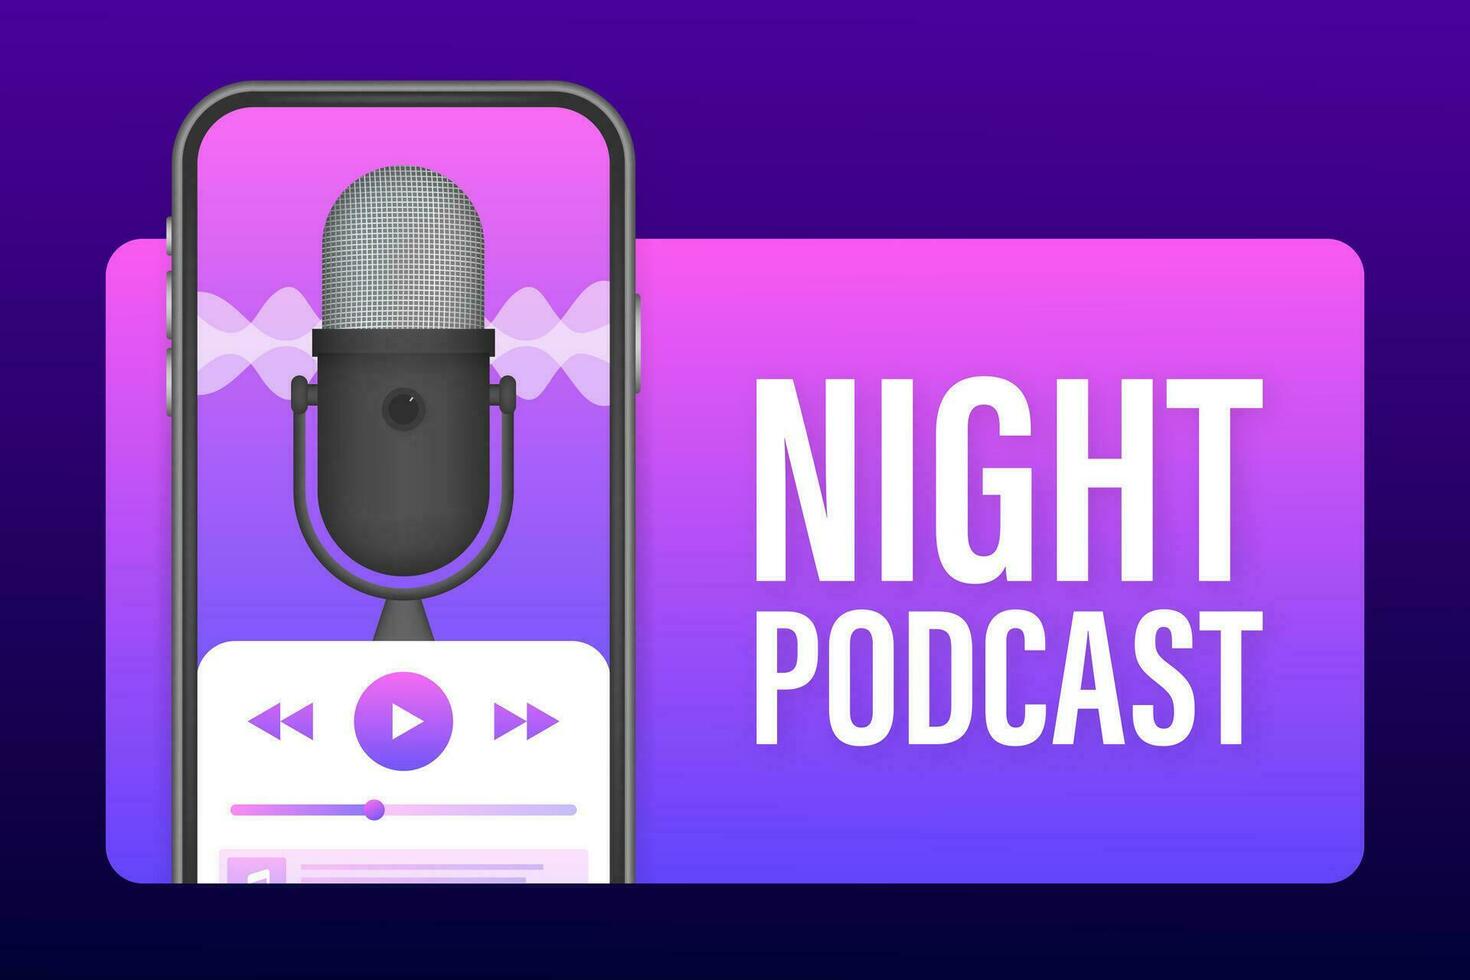 Night Podcast on smatrphone screen, vector symbol in flat isometric style isolated on color background. Vector stock illustration